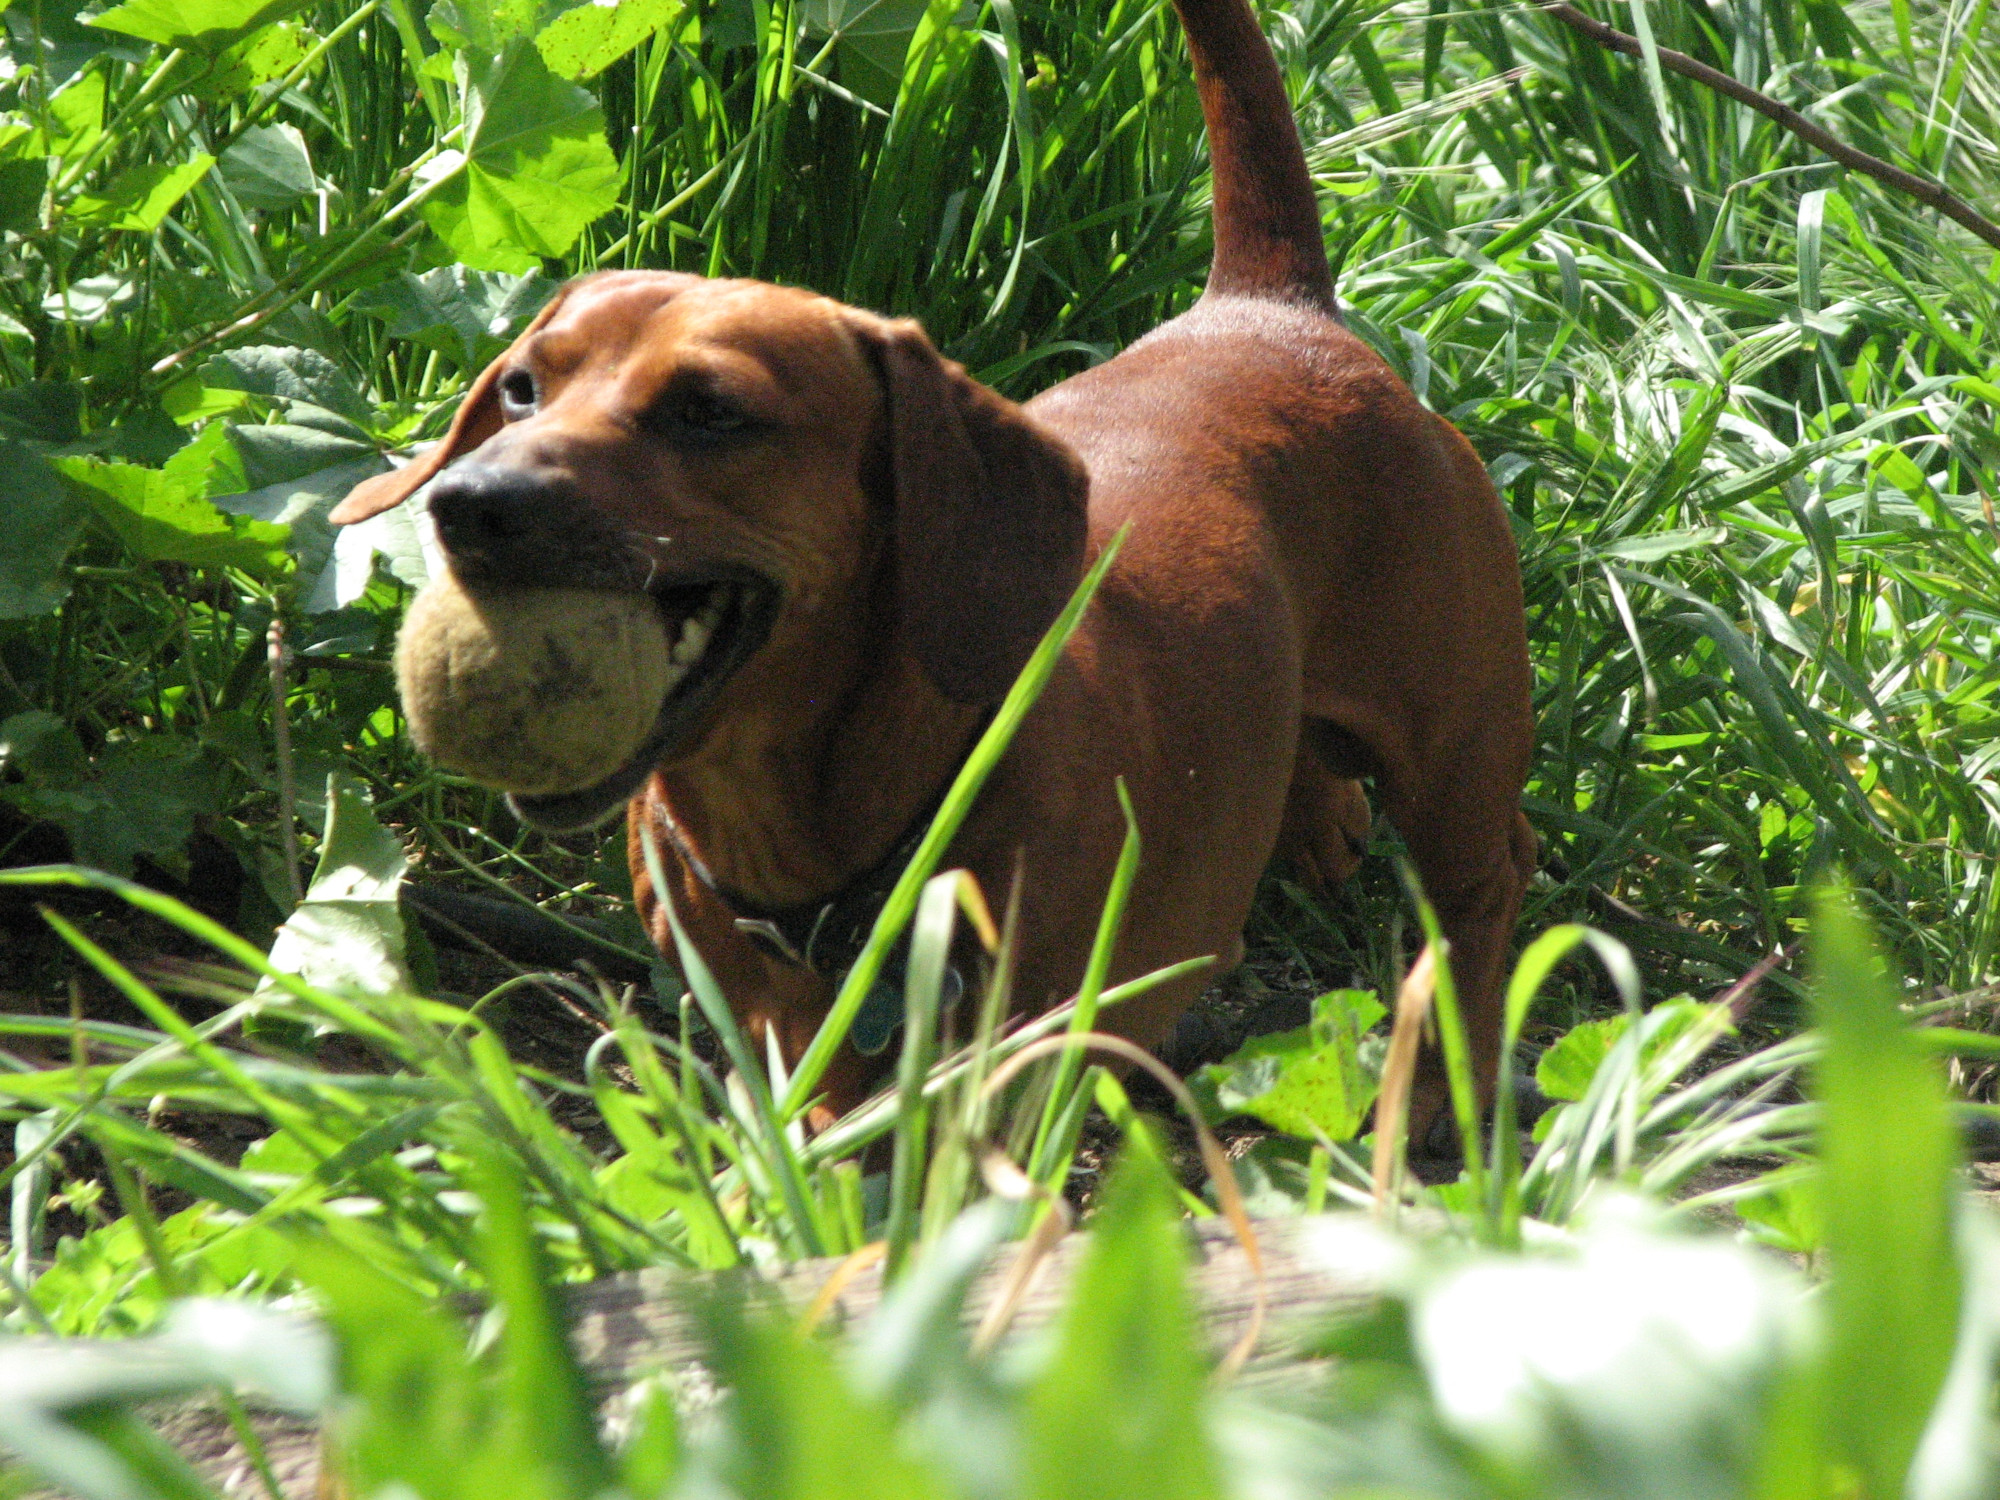 A dachshund with a ball in a field of grass